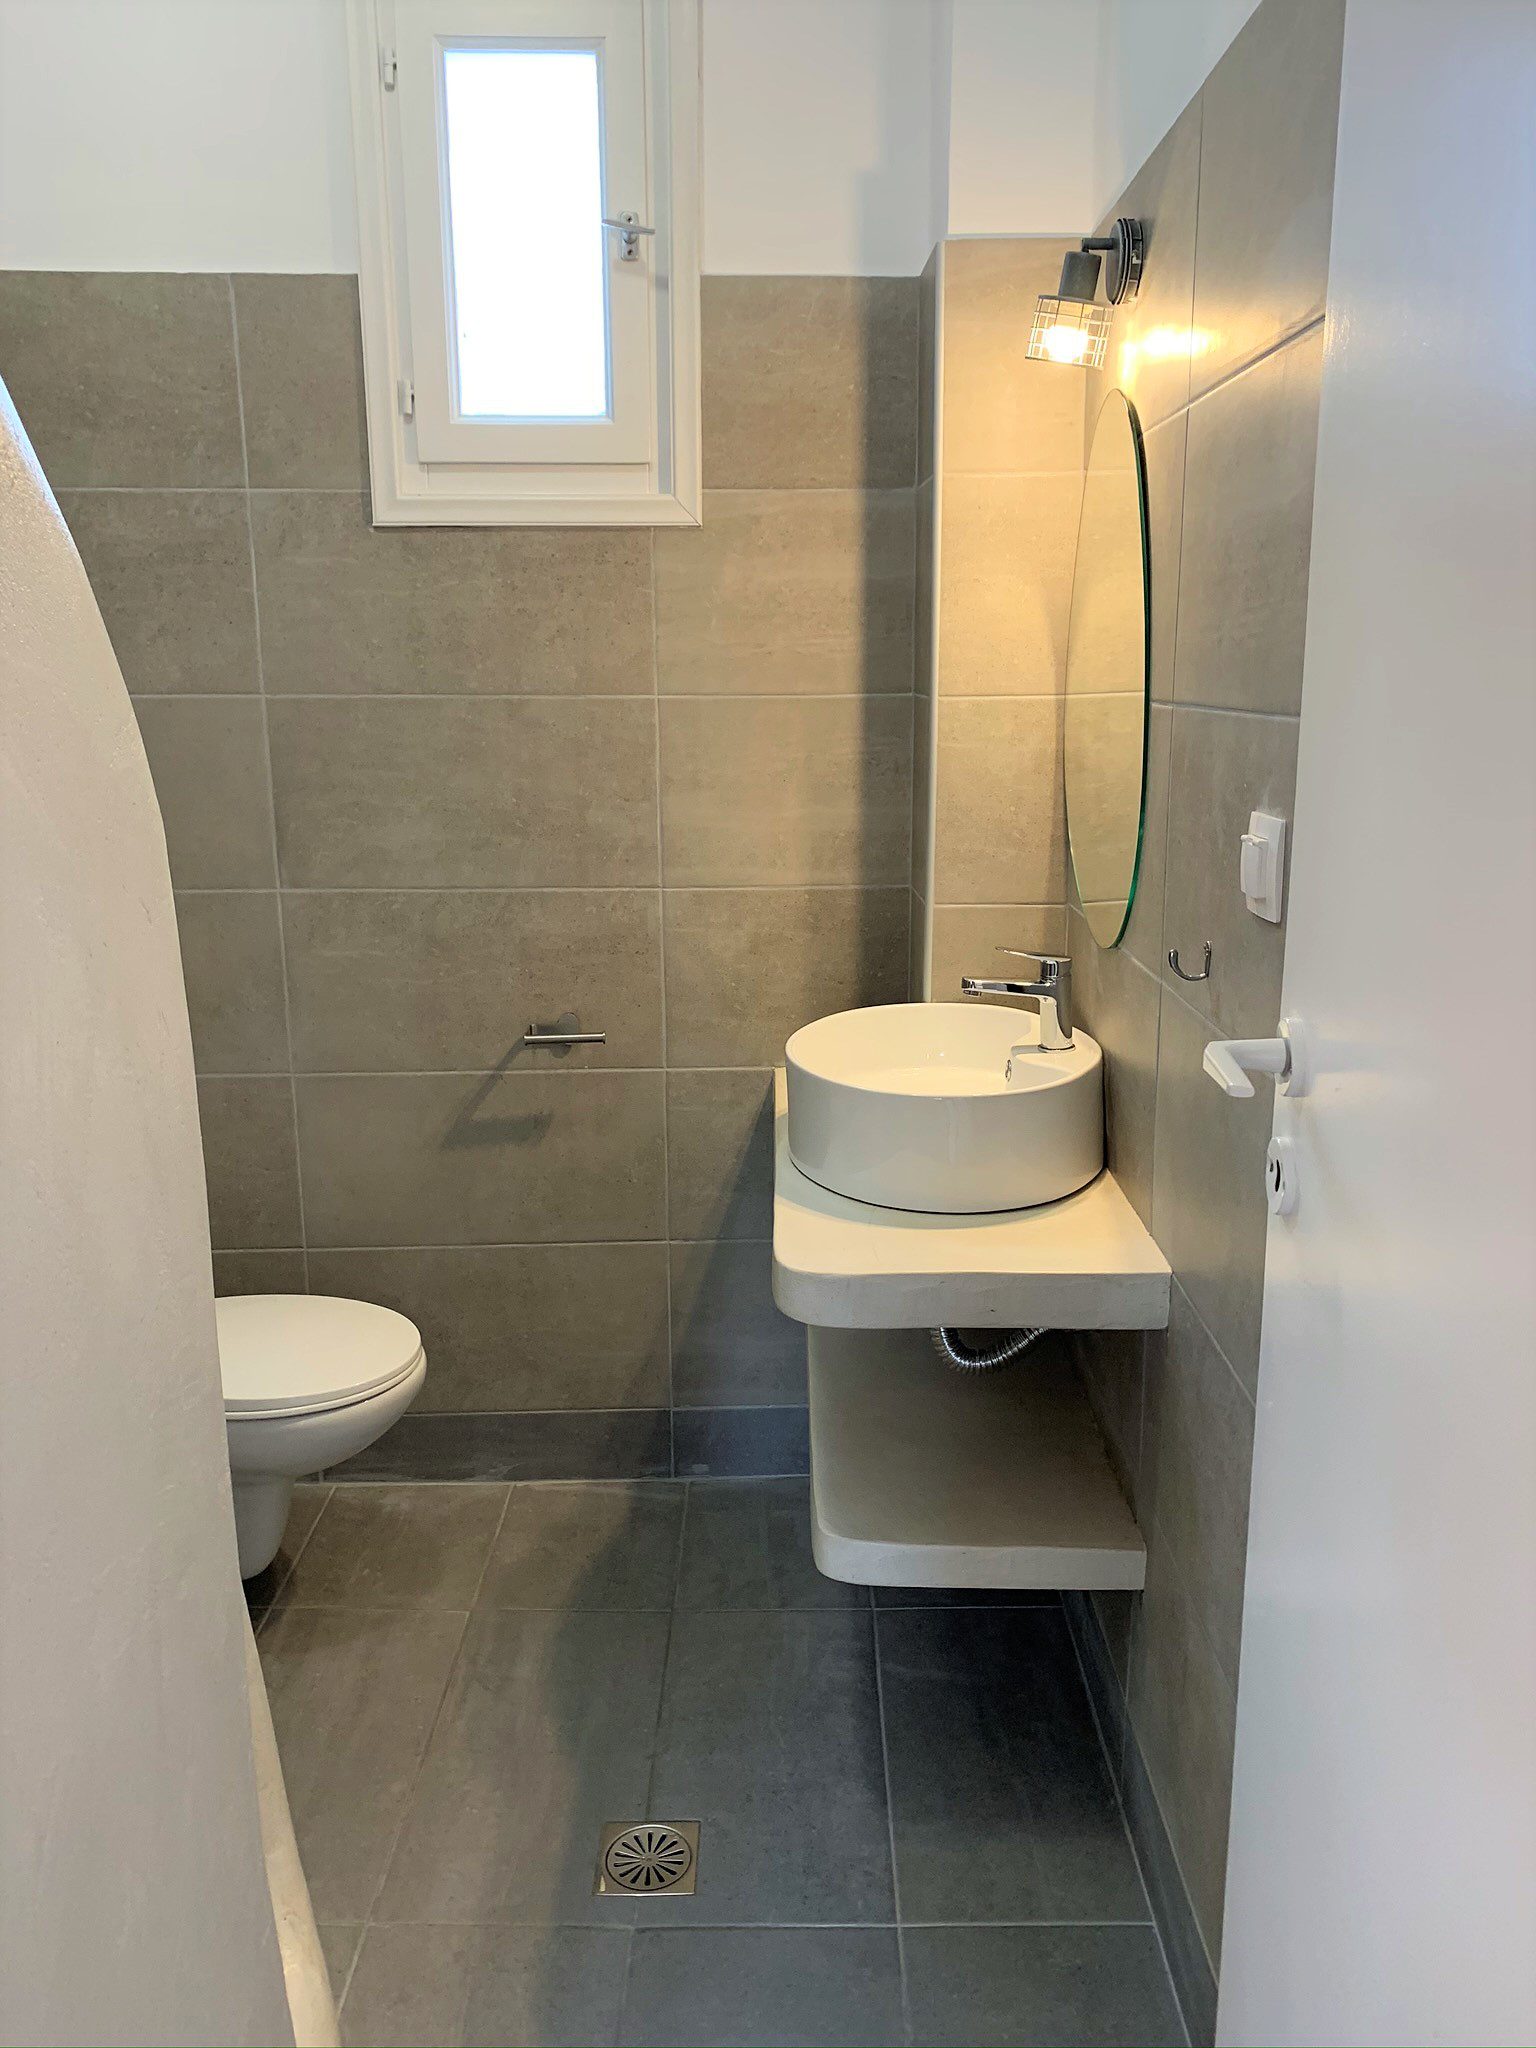 Bathroom of holiday apartments for rent Ithaca Greece, Kioni